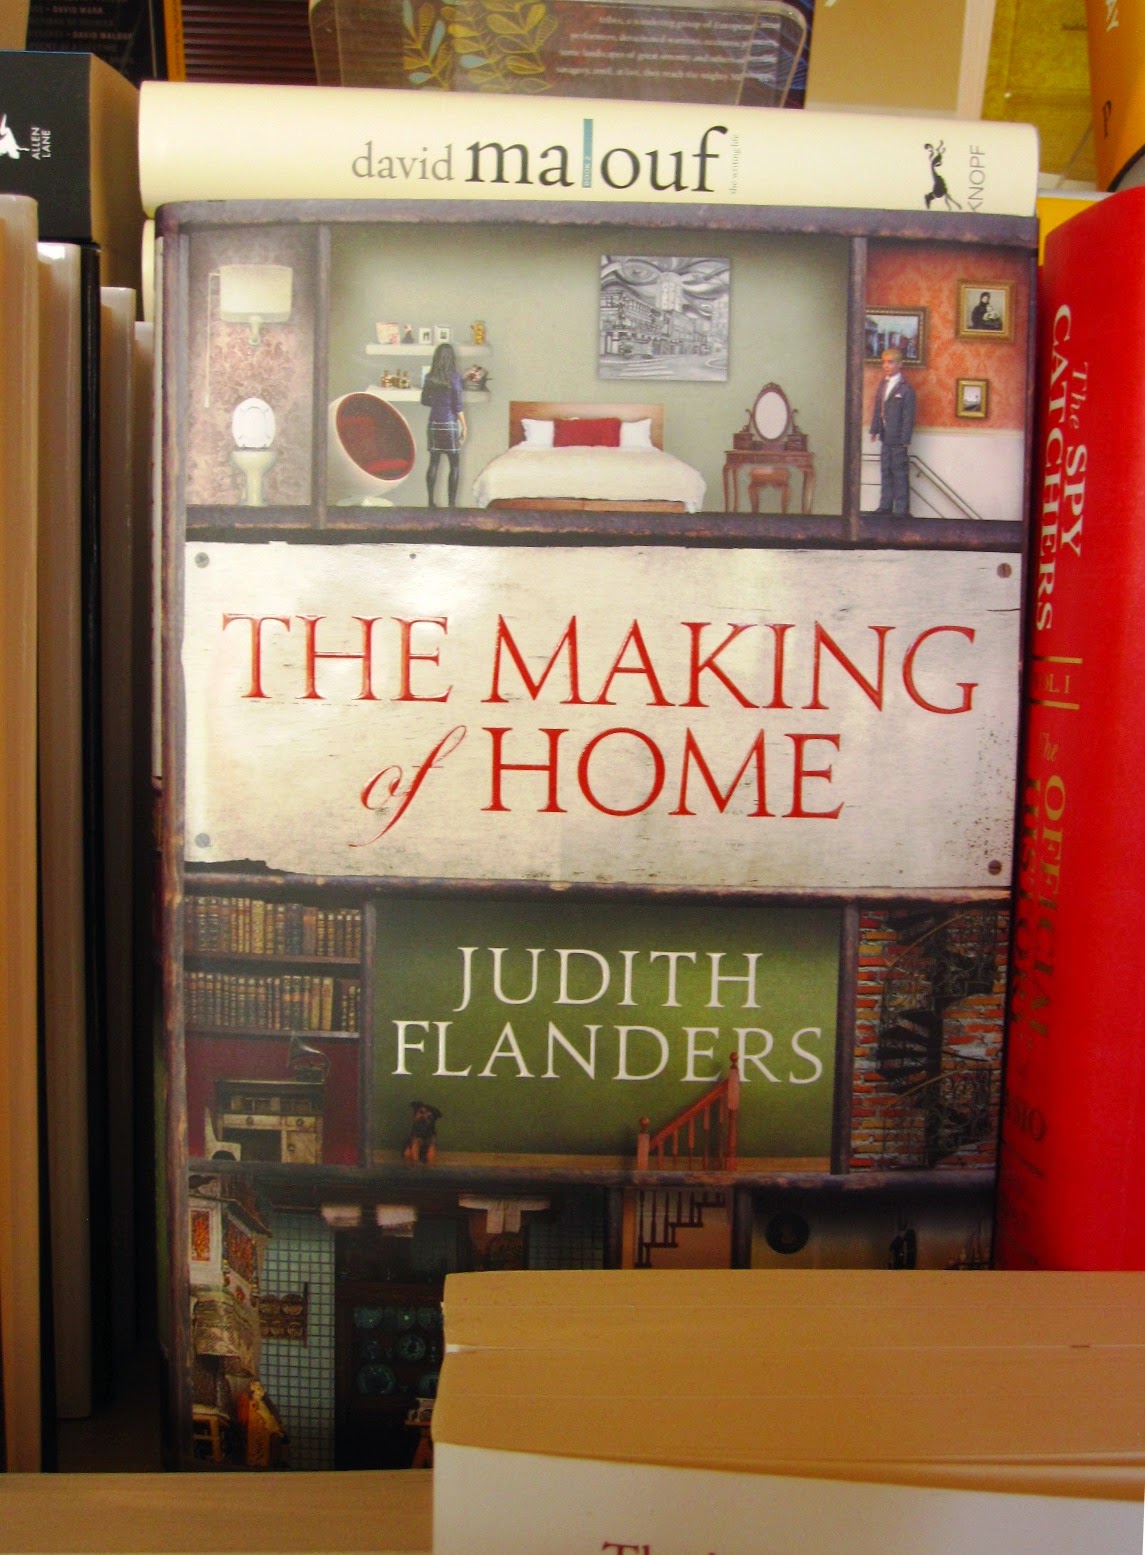 Copy of the book 'The Making of Home' on display in a book shop.